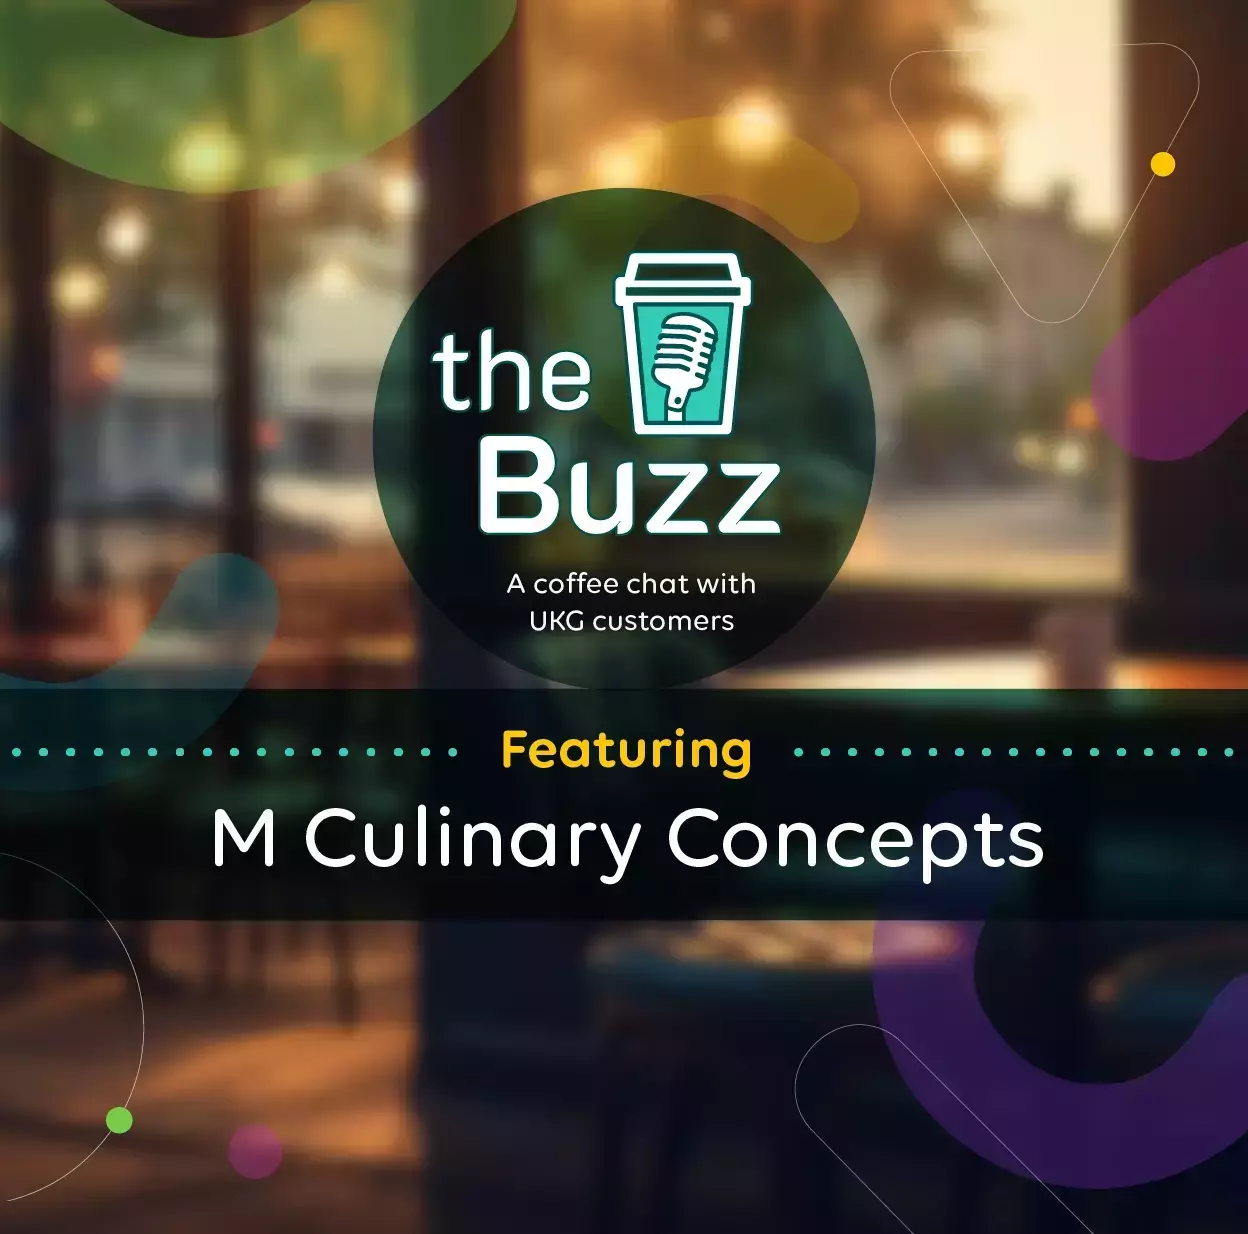 The Buzz: A Coffee Chat with UKG Customers Featuring M Culinary Concepts